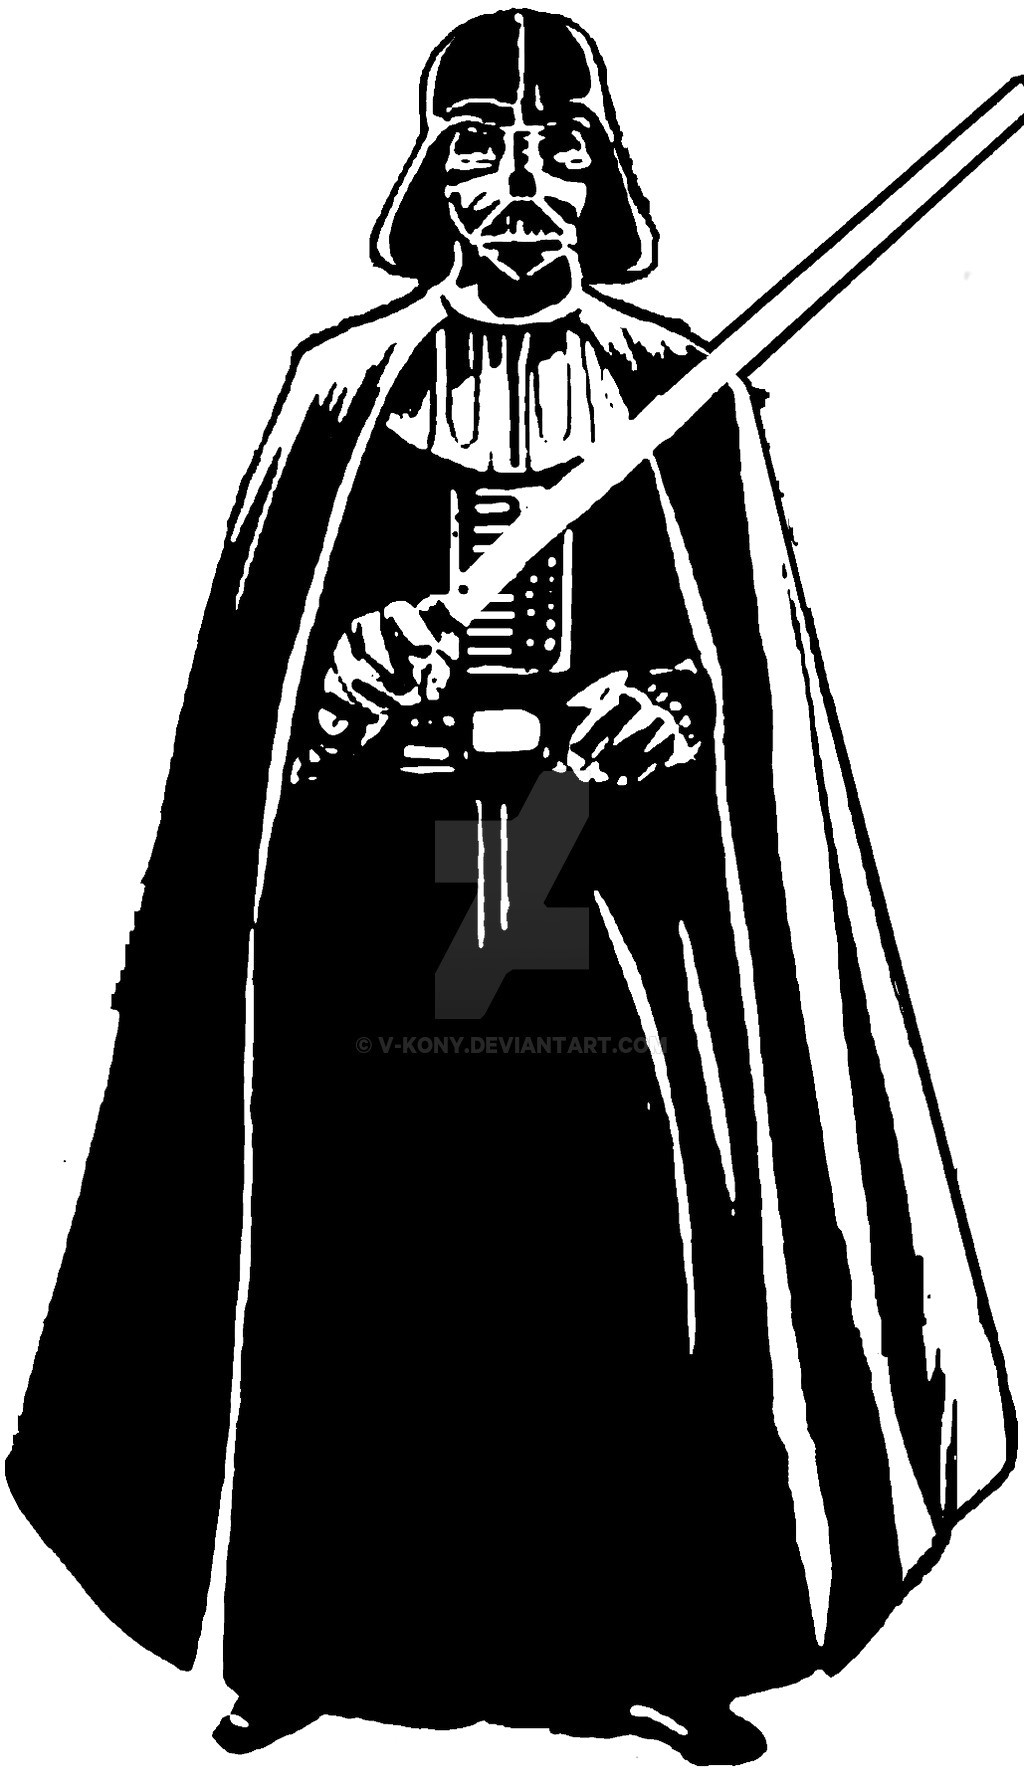 Darth vader clipart black and white » Clipart Station.